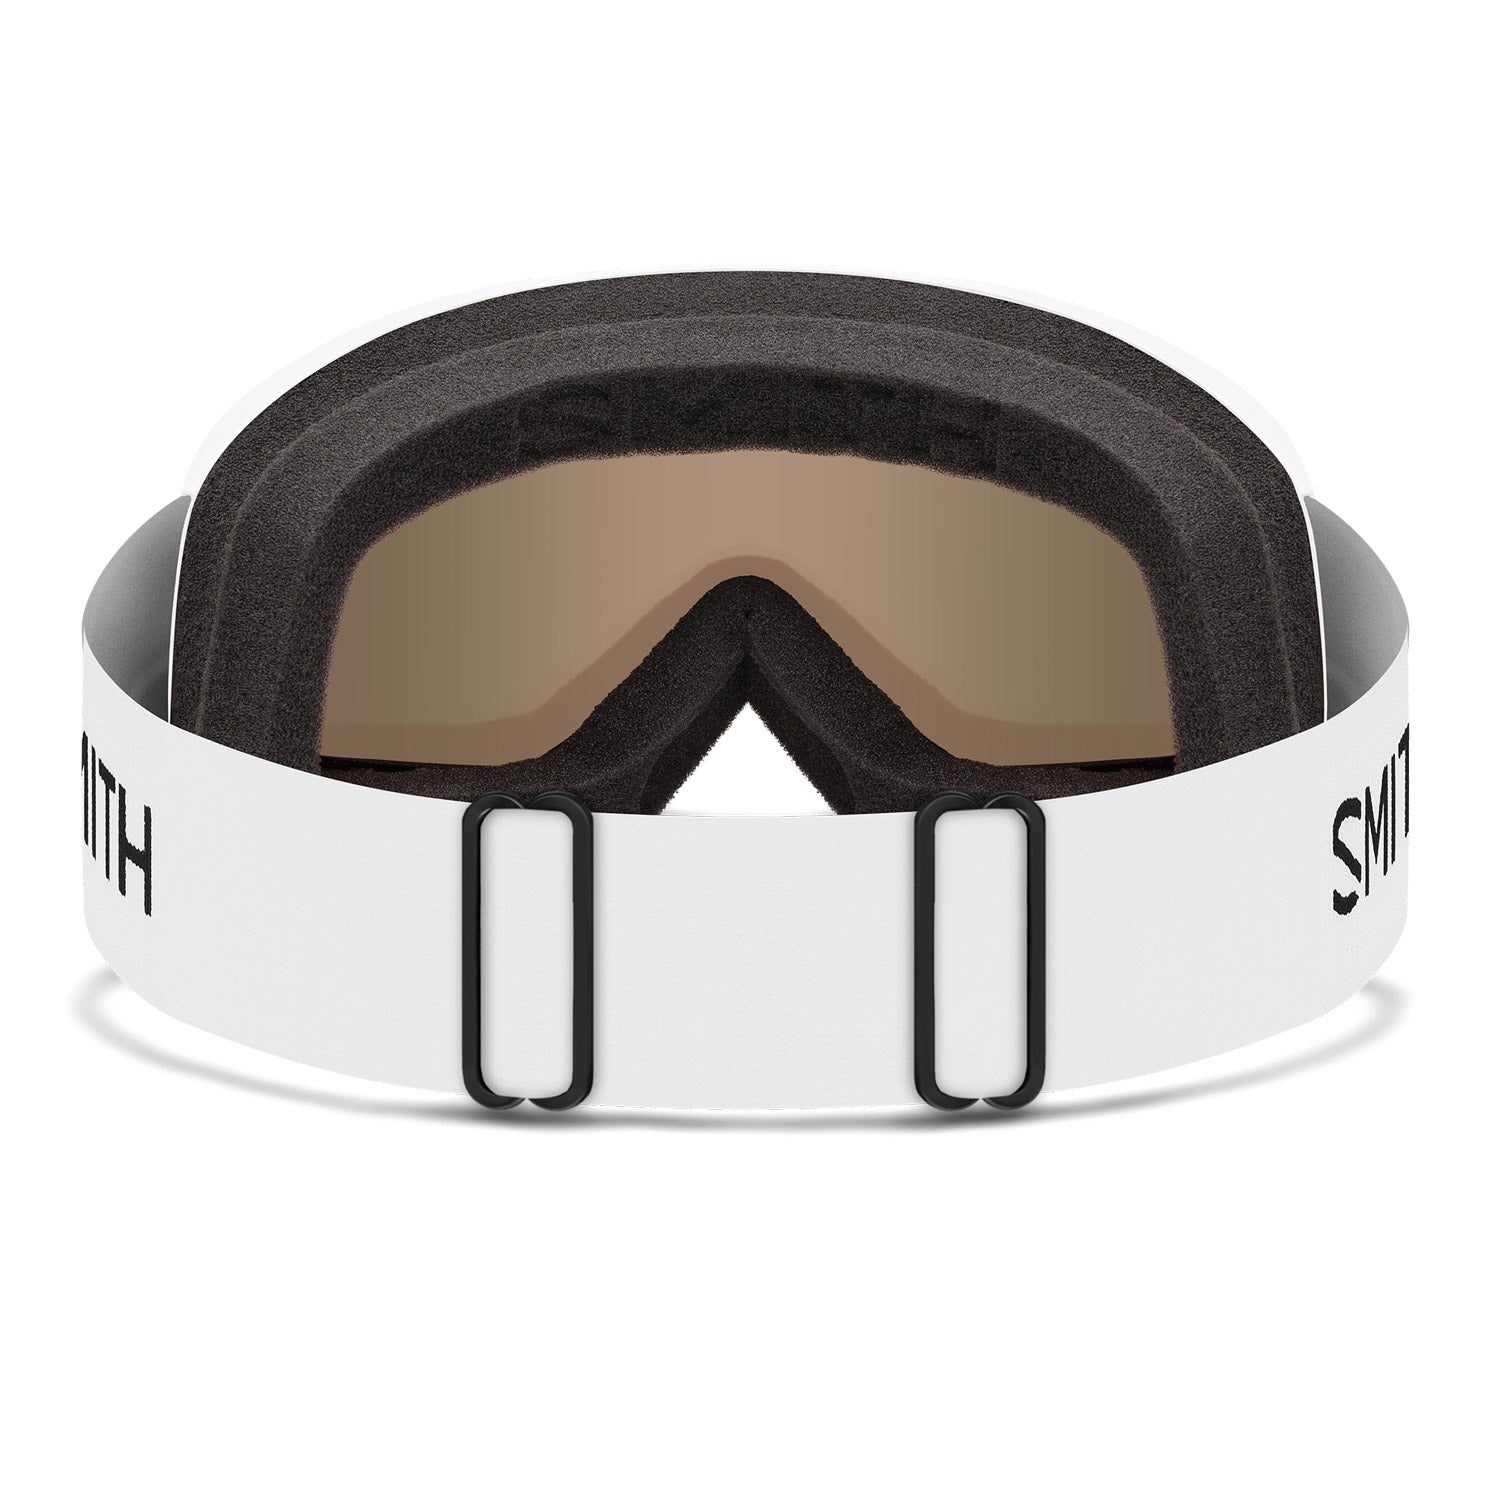 Grom Snow Goggles